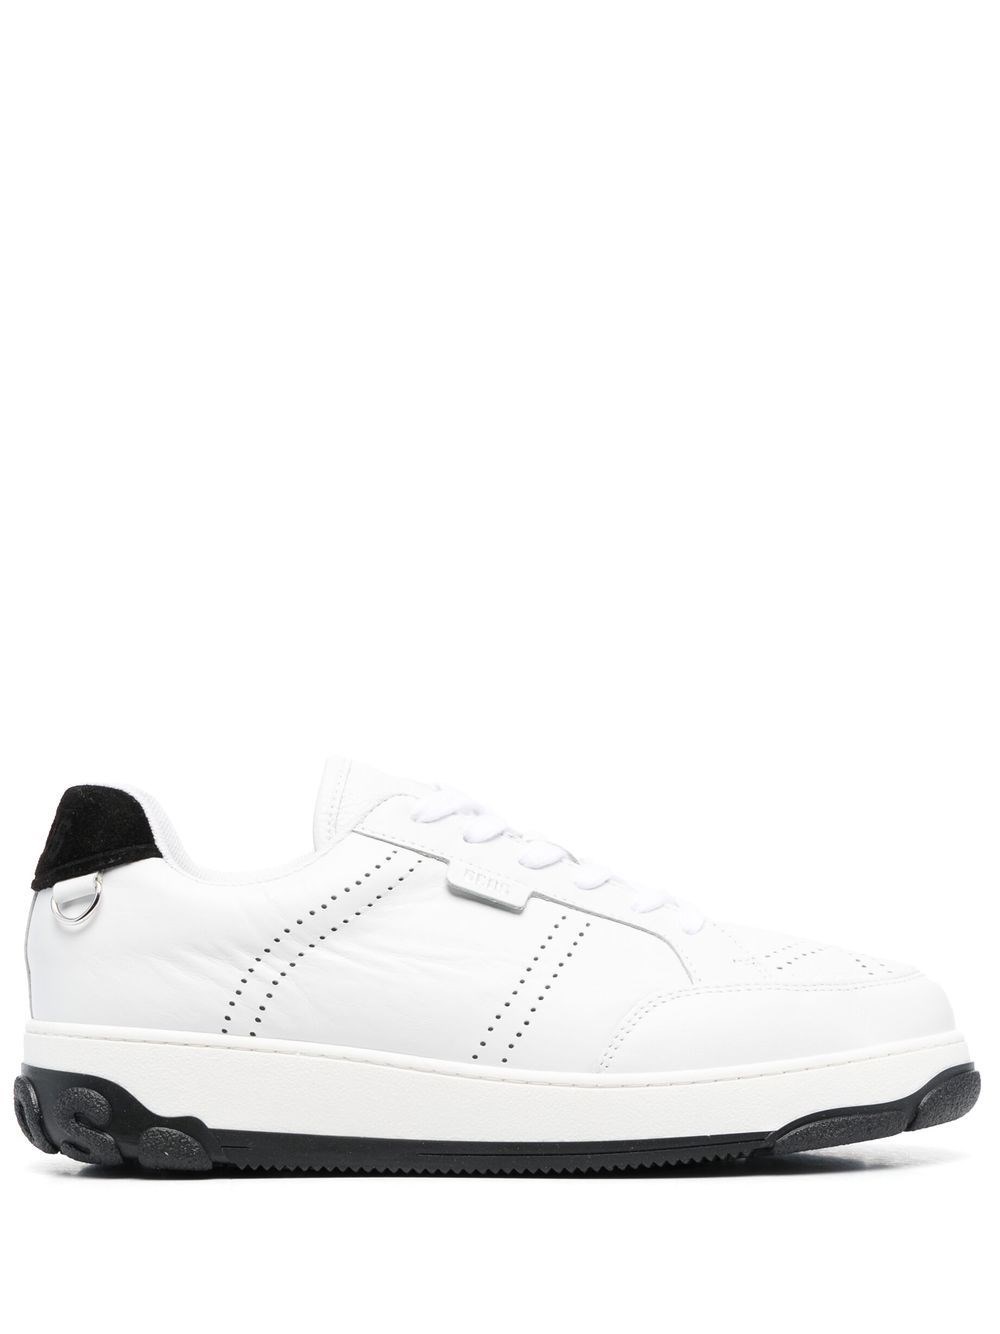 Gcds Two-tone Leather Sneakers In White